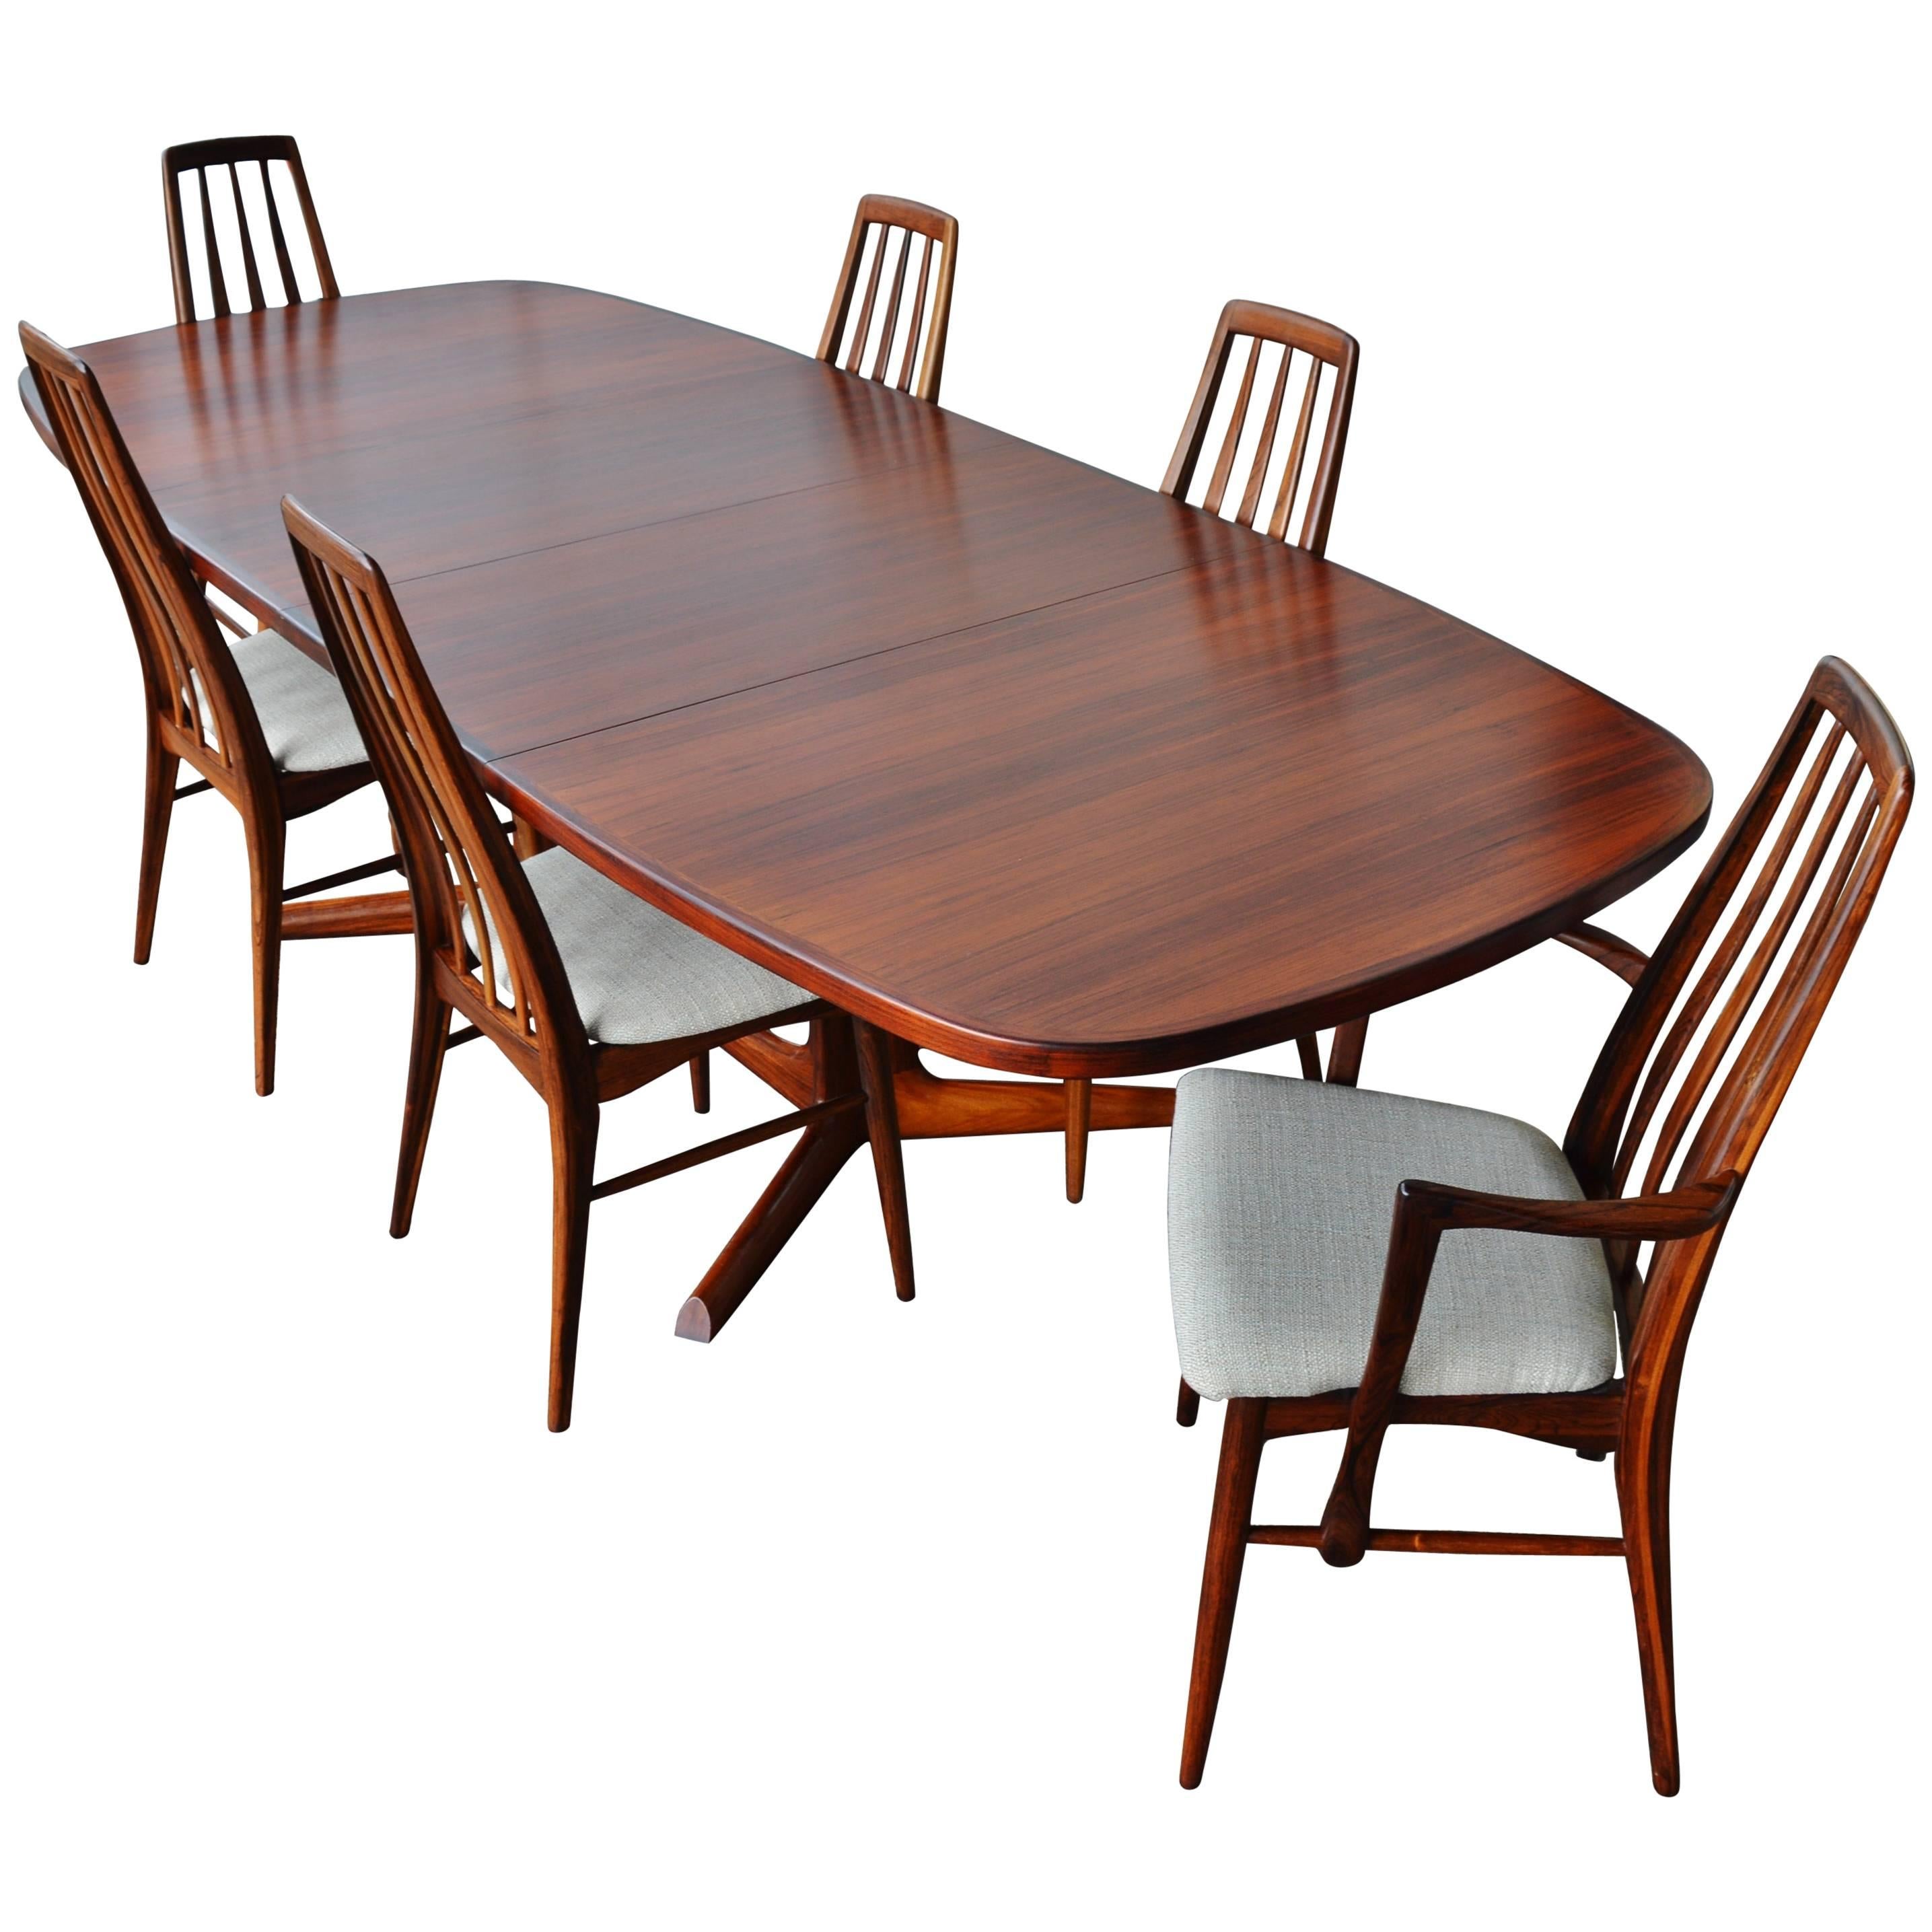 Impeccable Rosewood Moller Dining Table and Six Koefoeds Eva Chairs, Danish